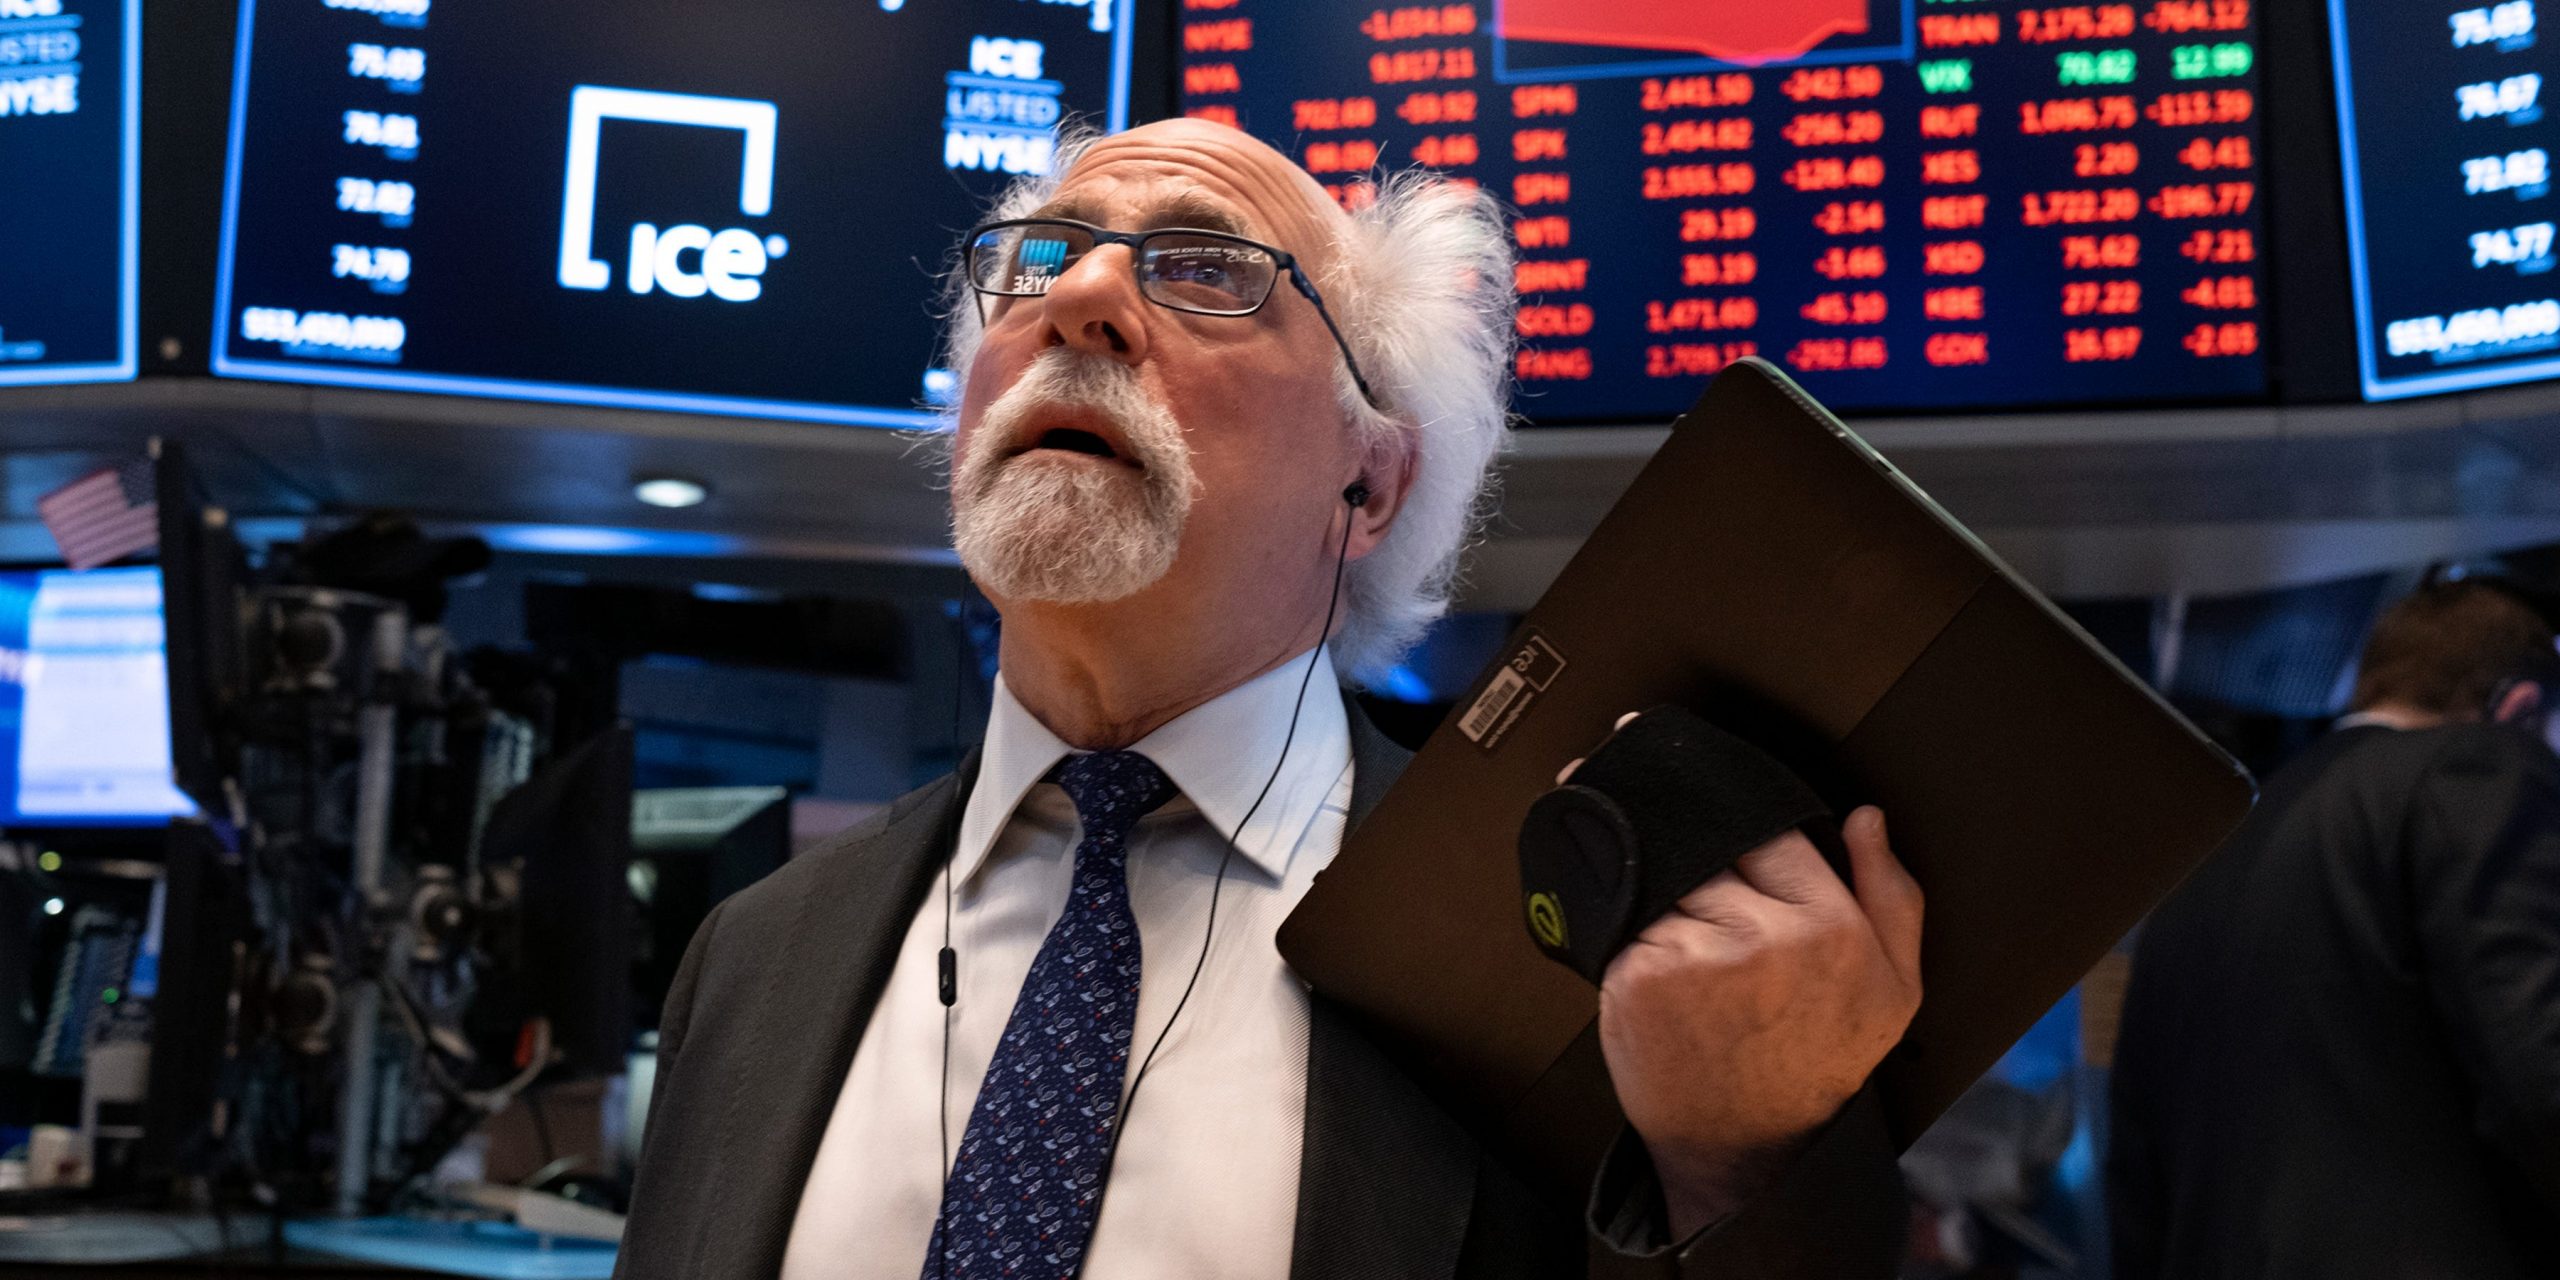 Trader Peter Tuchman works on the floor of the New York Stock Exchange Monday, March 16, 2020. (AP Photo/Craig Ruttle)